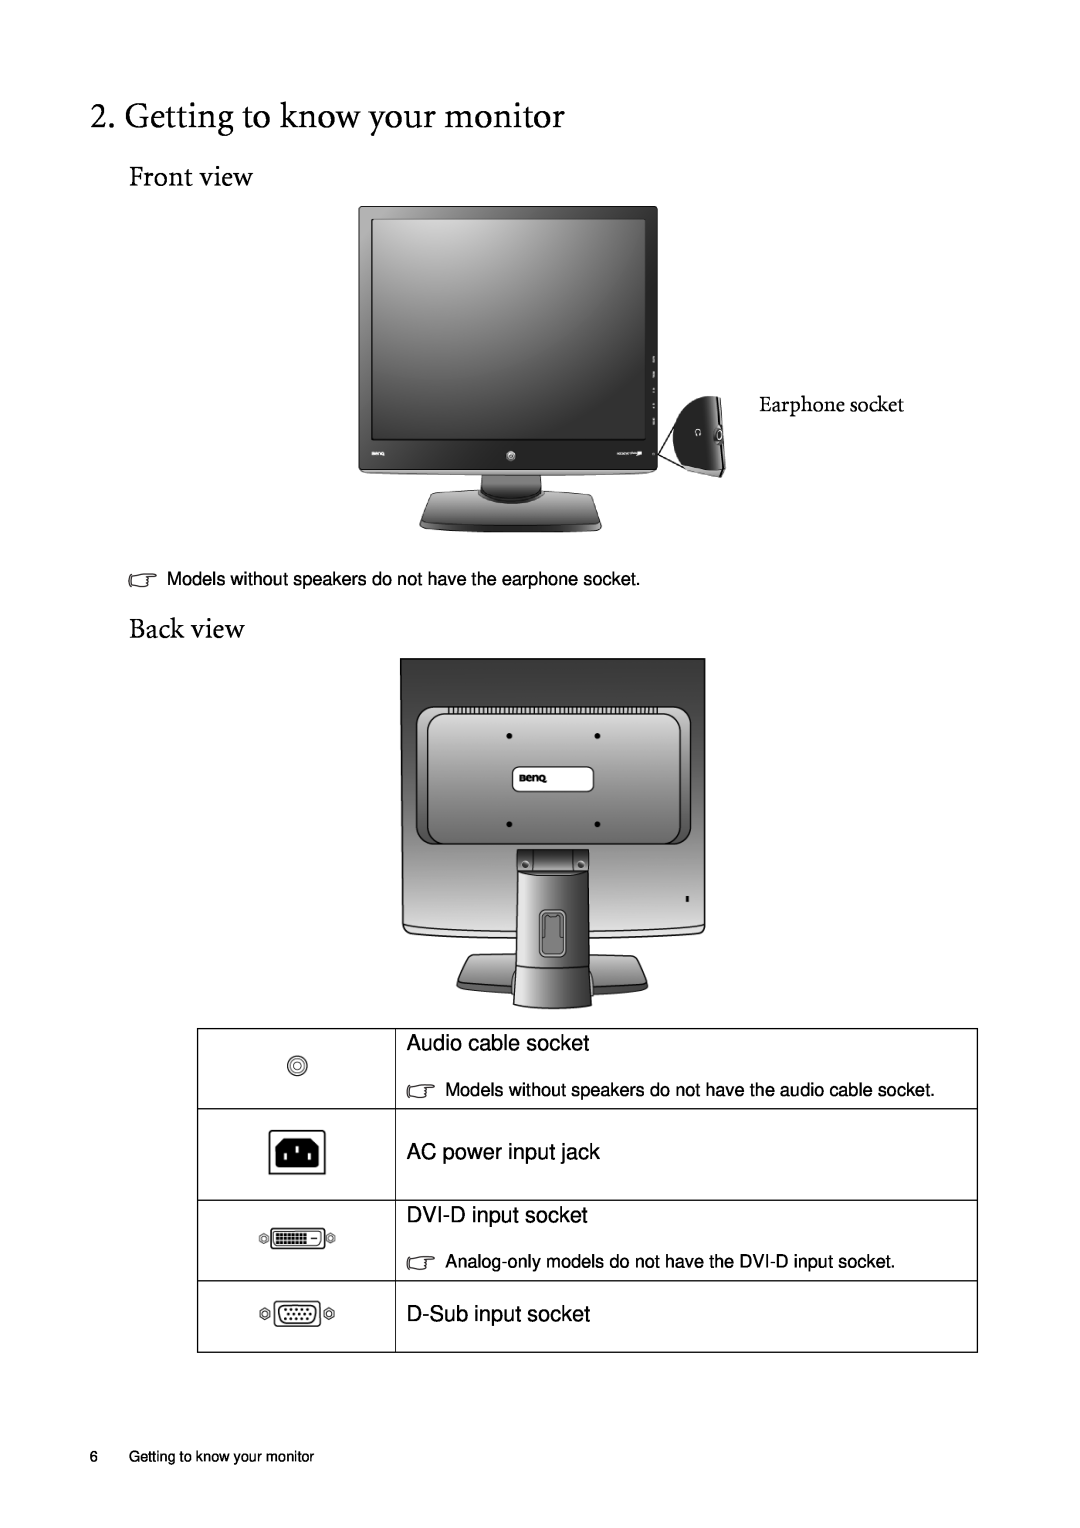 BenQ E900N Getting to know your monitor, Front view, Back view, Audio cable socket, AC power input jack DVI-D input socket 